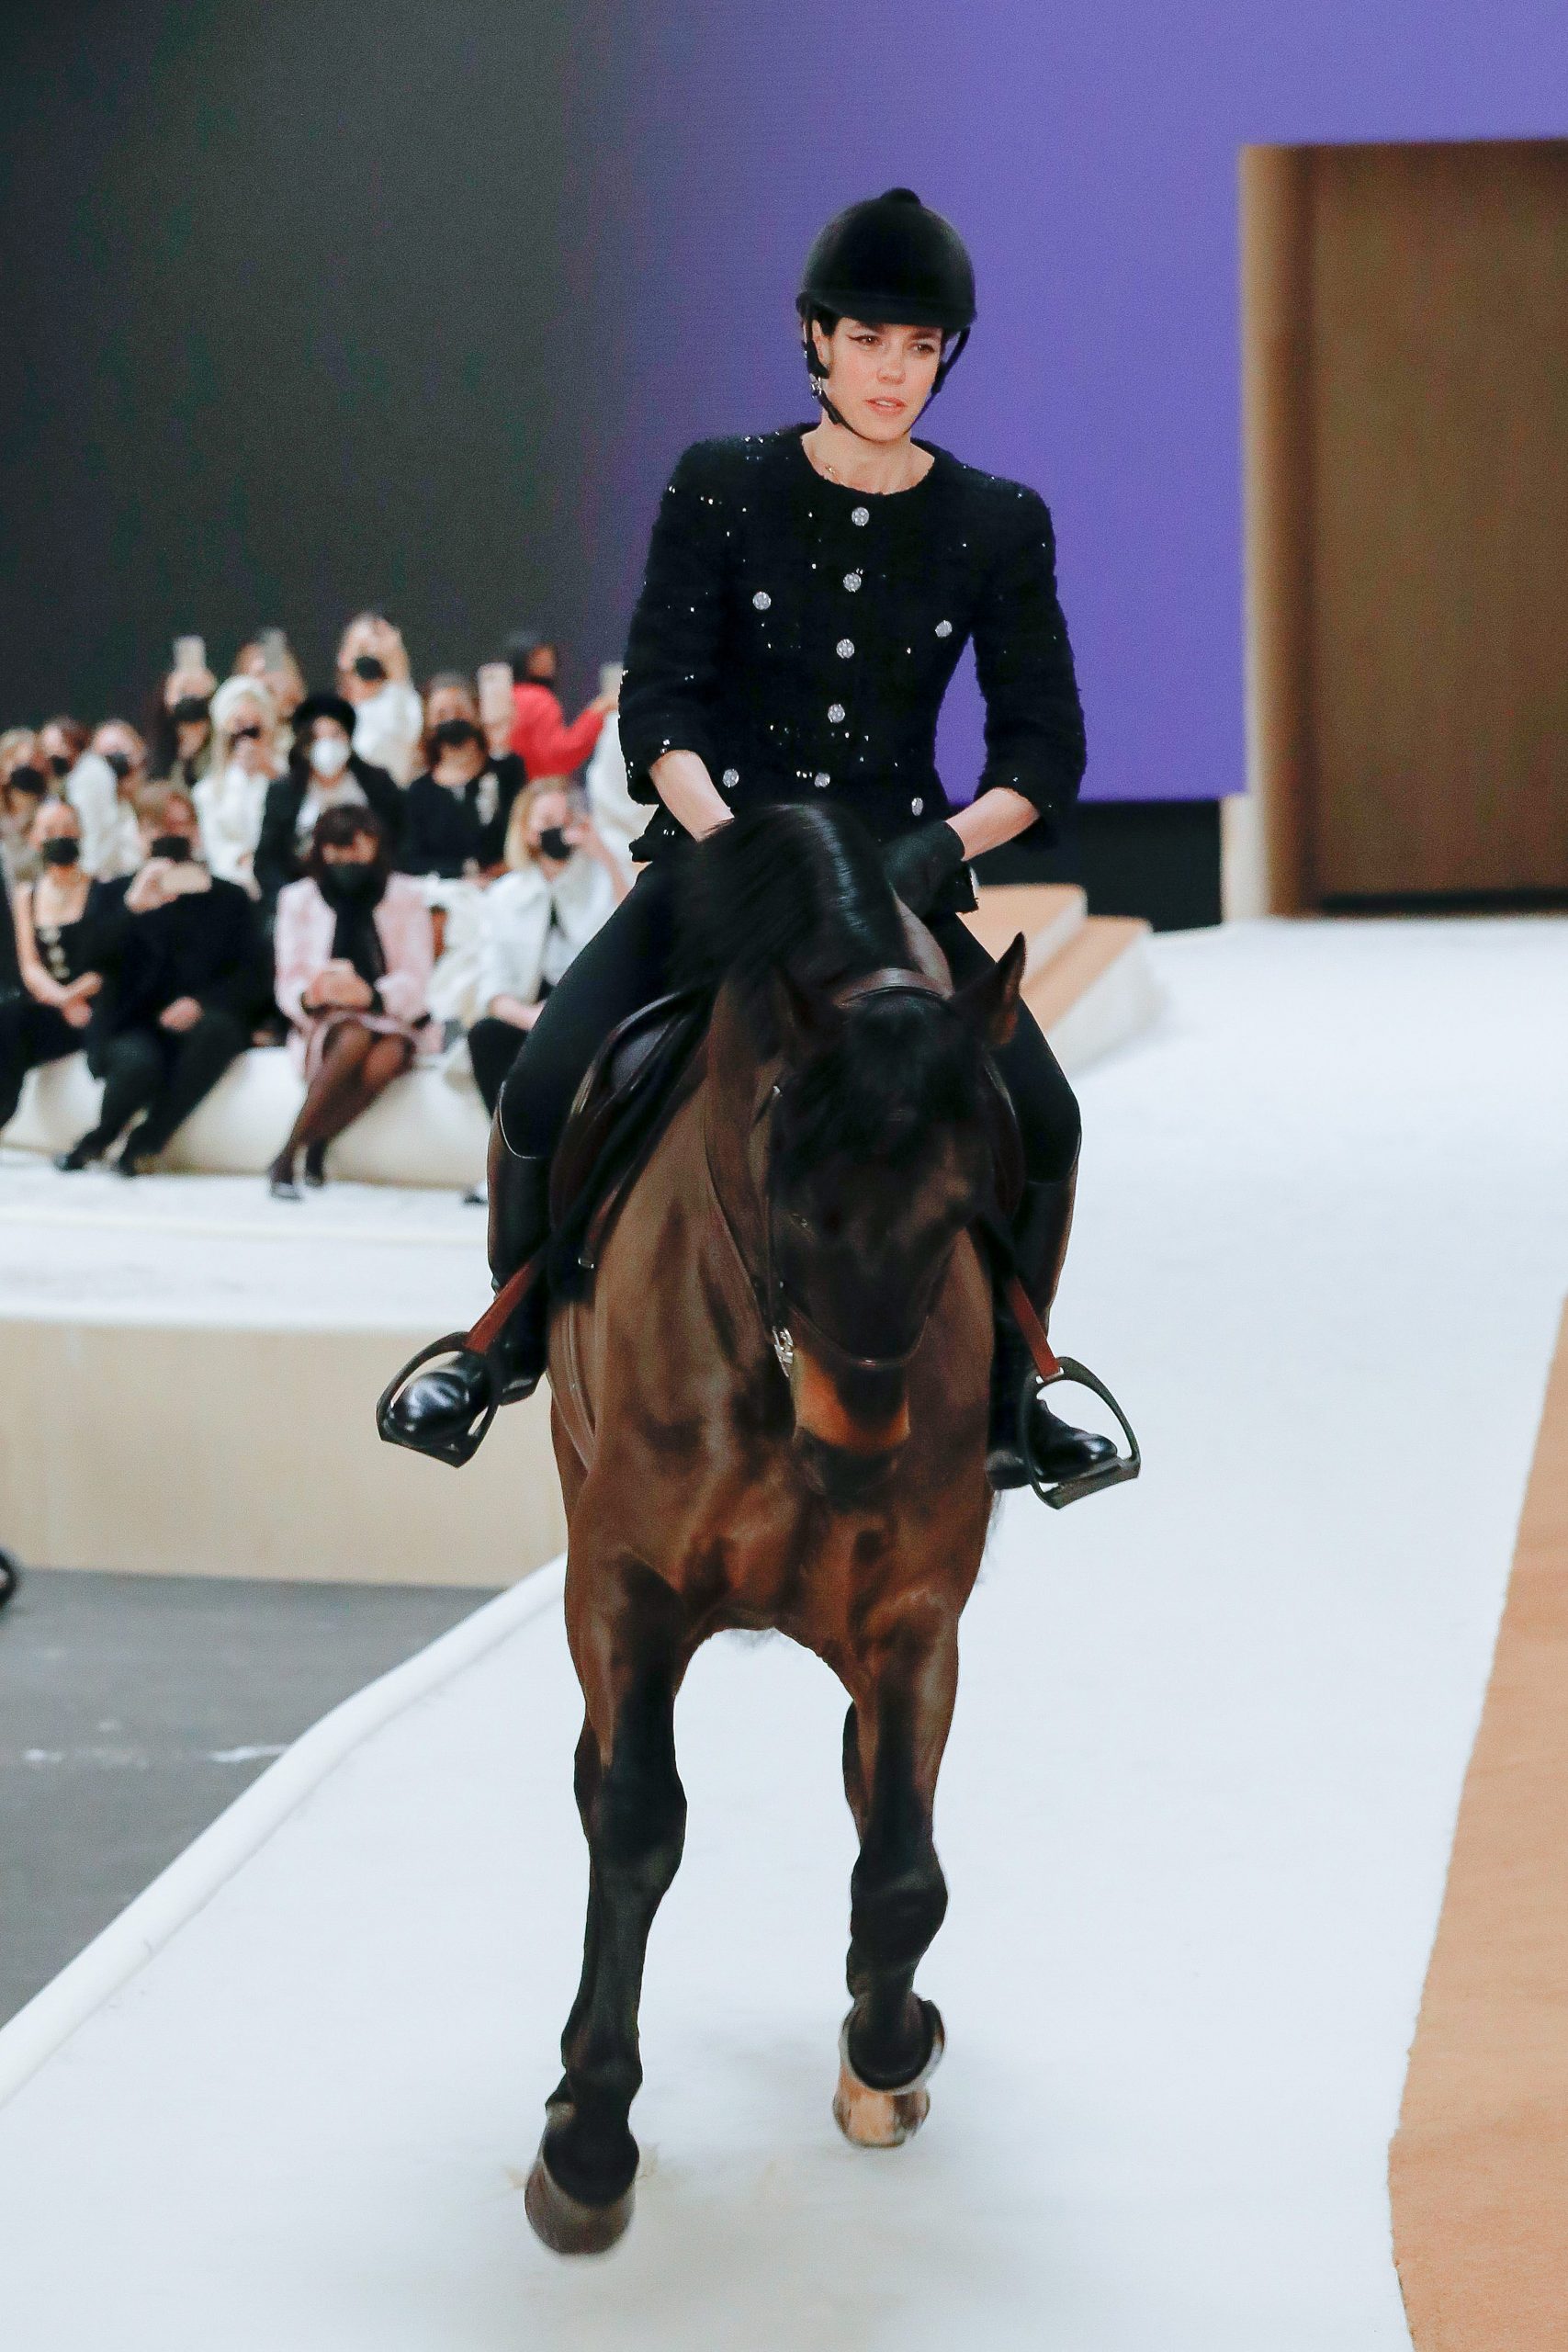 Charlotte Casiraghi rides a horse on the runway during the Chanel Haute Couture Spring/Summer 2022 show as part of Paris Fashion Week at Le Grand Palais Ephemere on January 25, 2022 in Paris, France.